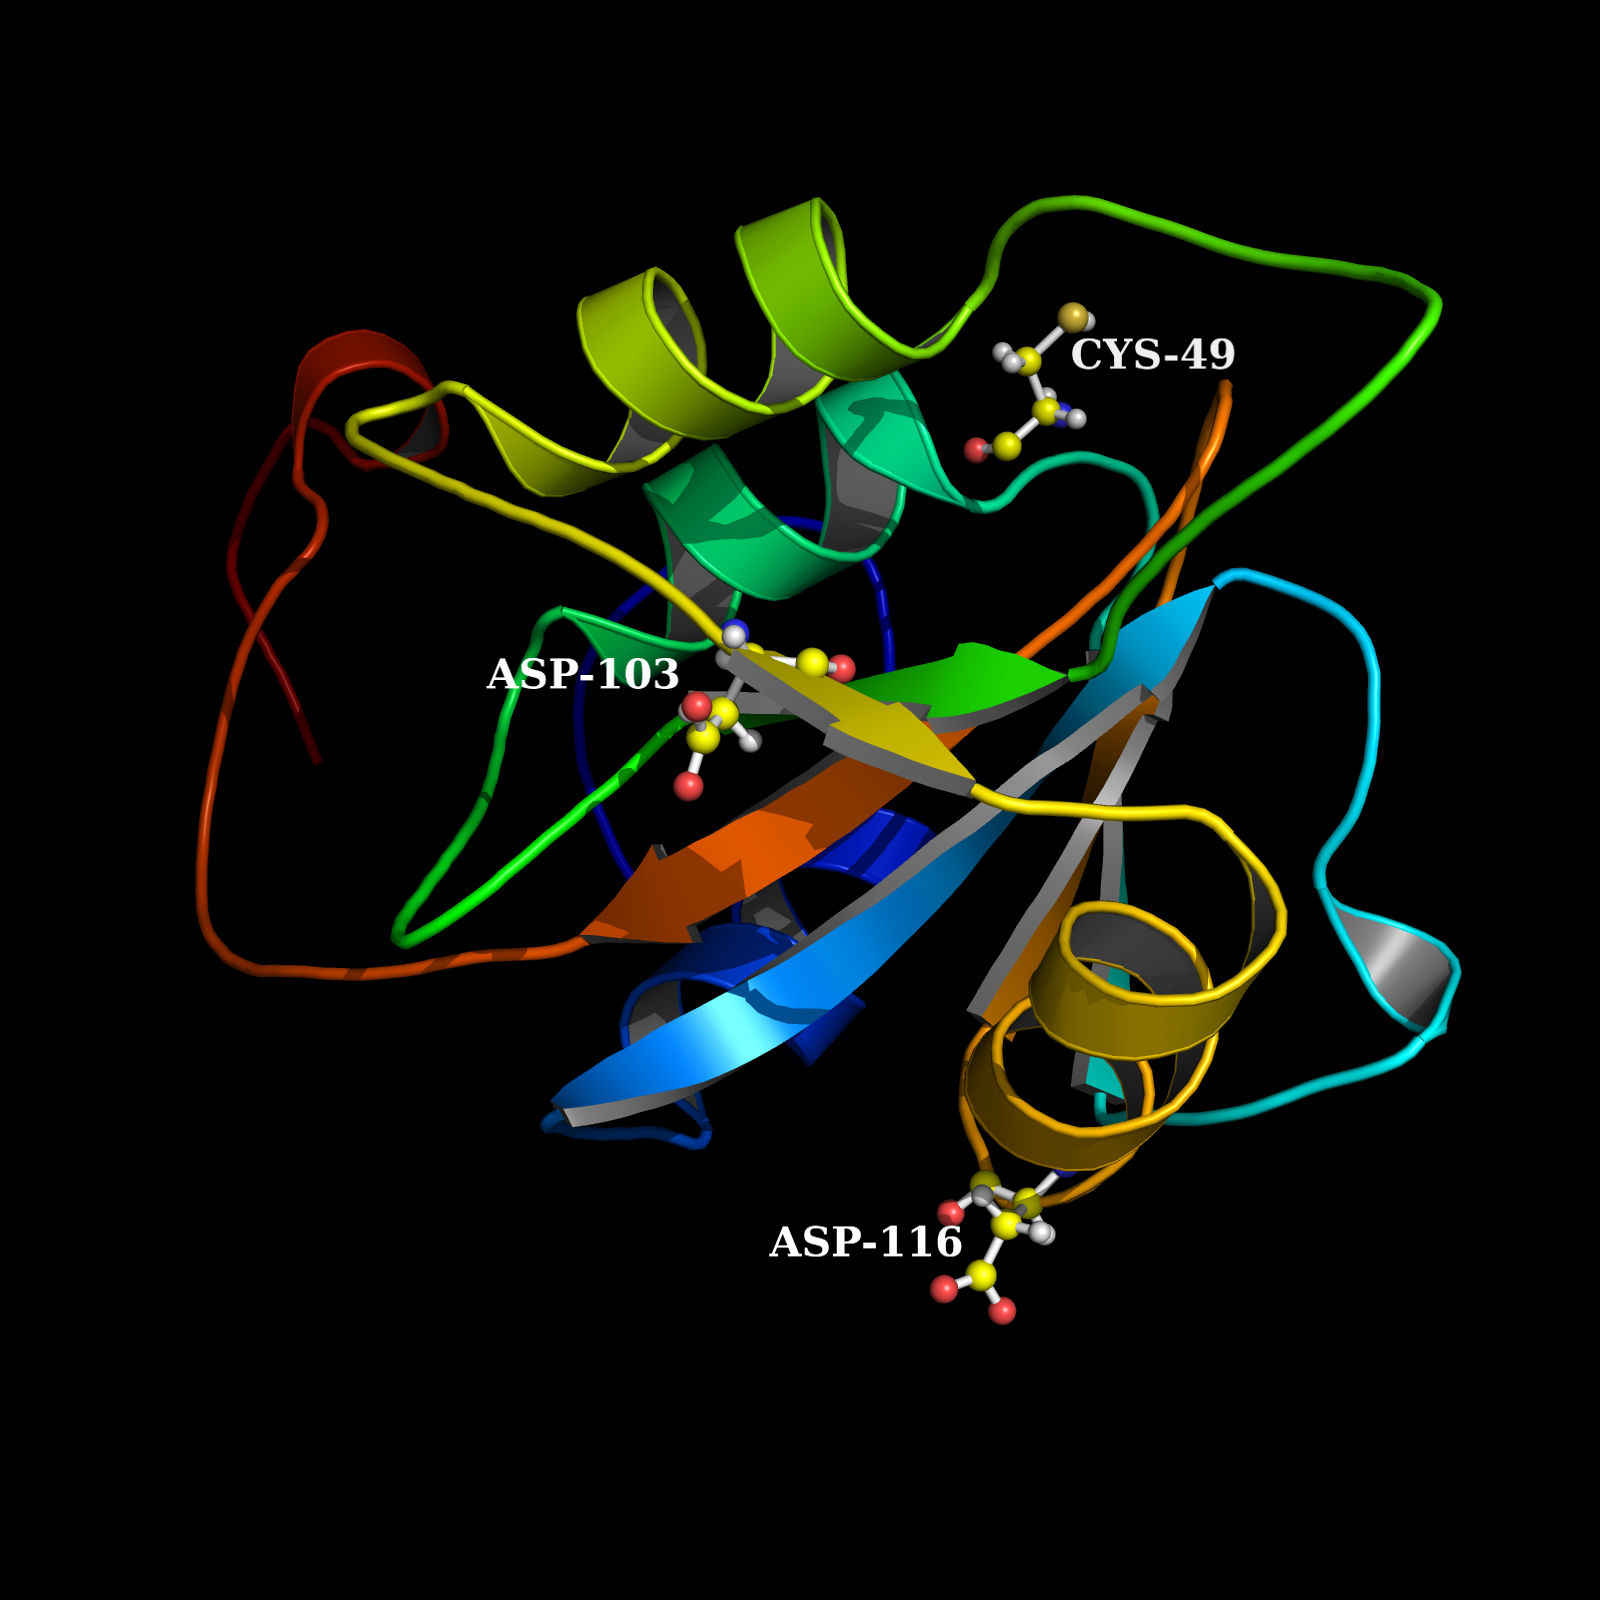 Figure 7: Structure of the L-fucose mutarotase-ovispirin fusion protein after the substitution of the three amino acids and a 25 ns MD simulation. In the image the three amino acids are labeled.